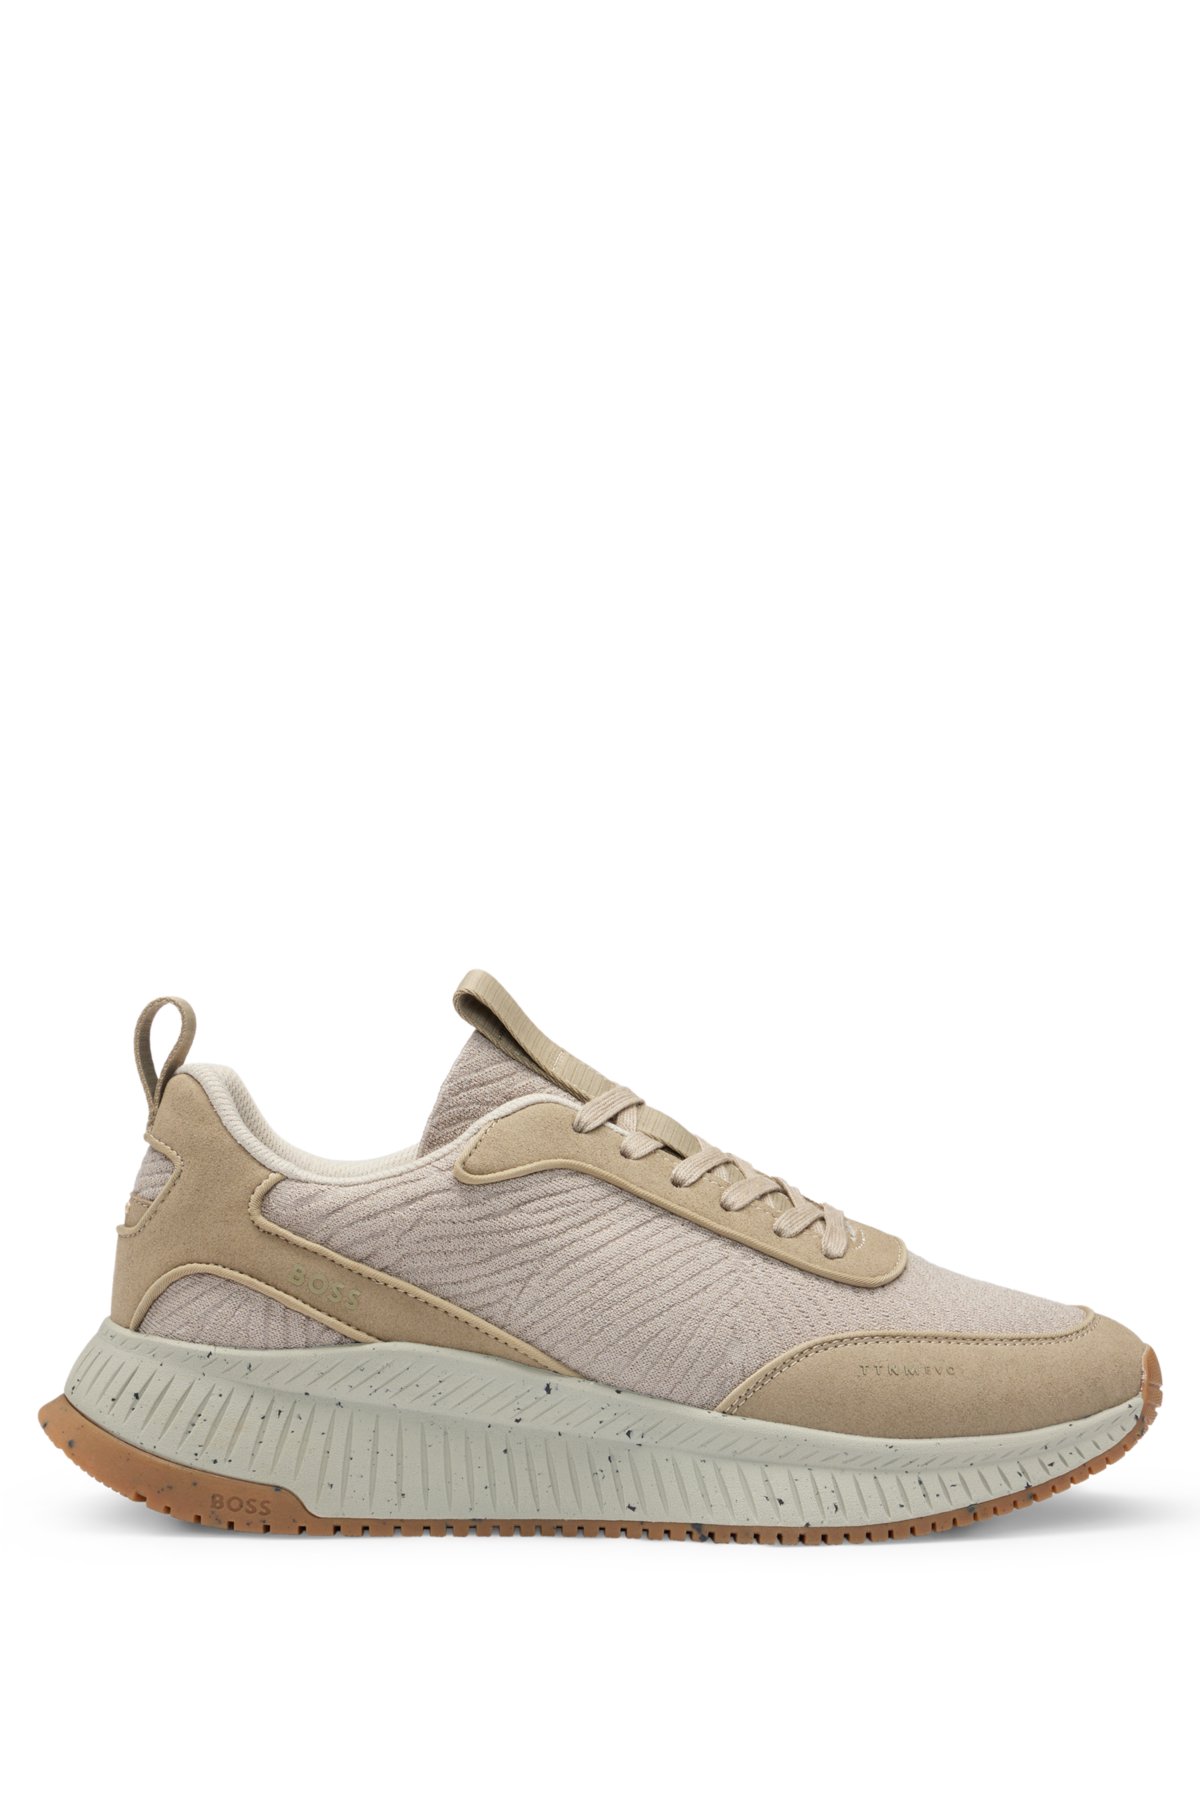 BOSS x ACBC Trainers With Speckled Effect, Light Beige